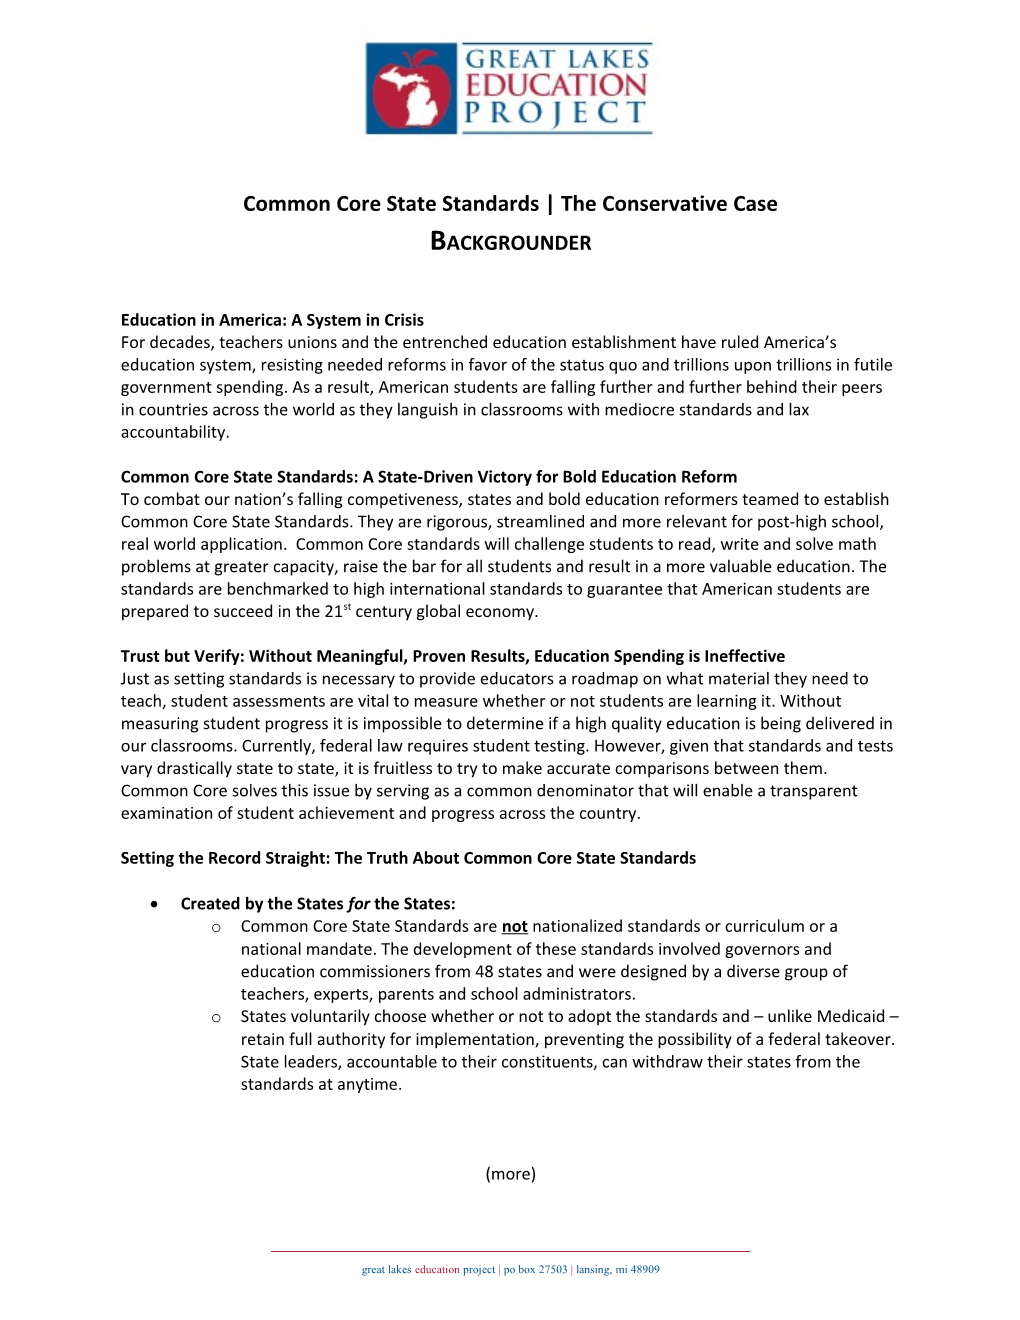 Common Core State Standards the Conservative Case